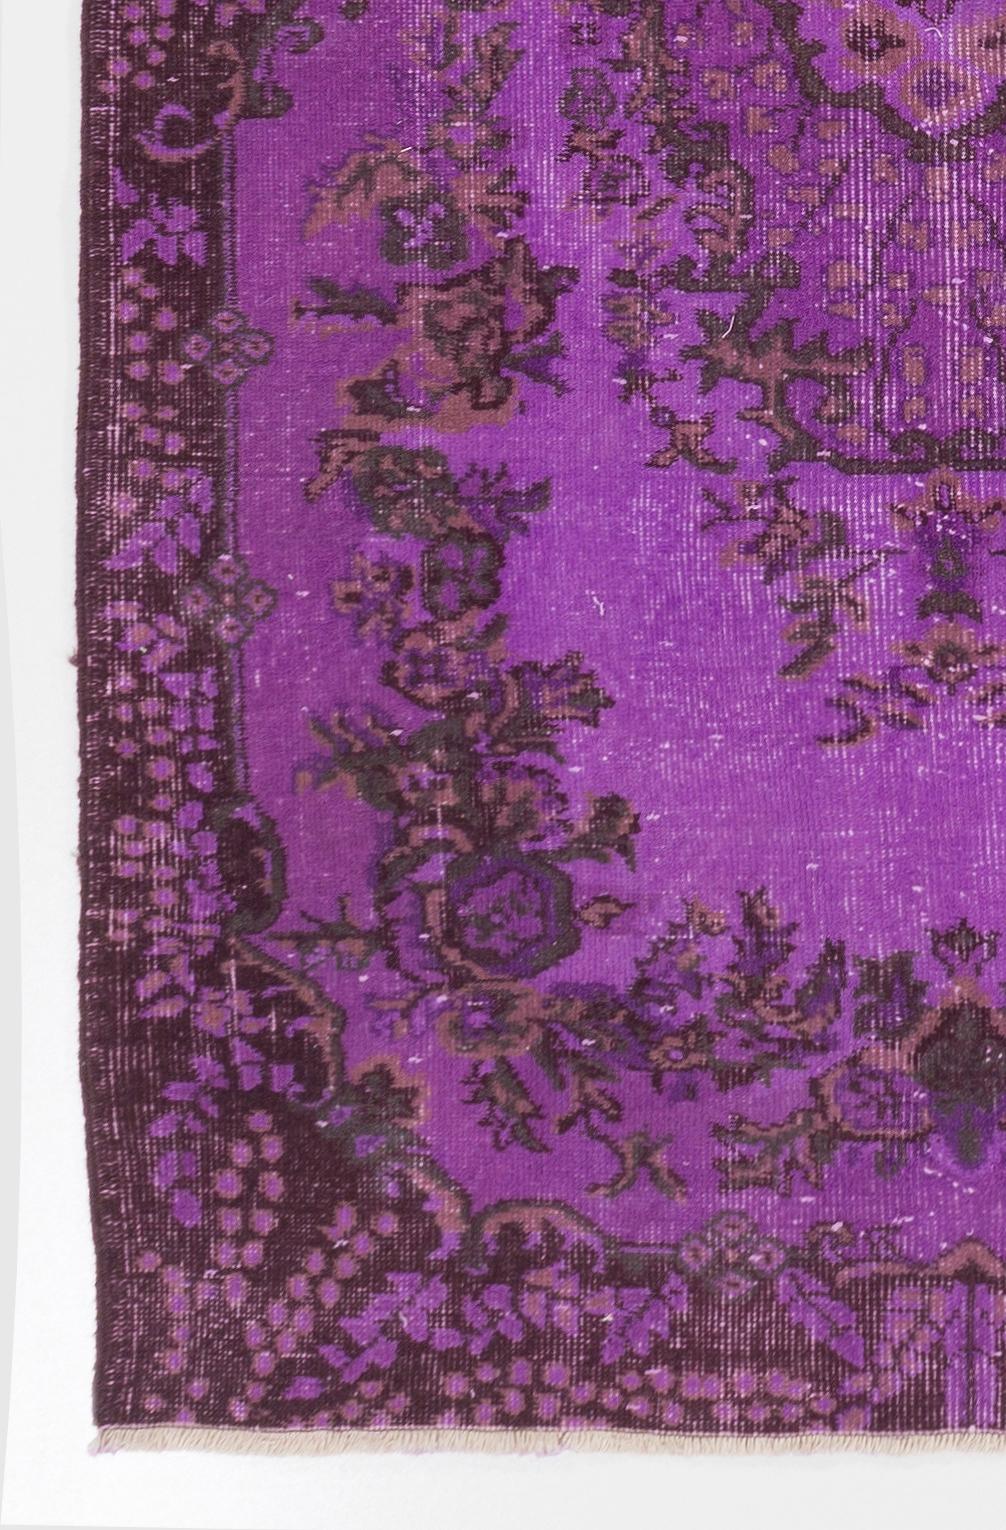 Hand-Woven 4.2x6.6 Ft Baroque Design Handmade Vintage Accent Rug Over-dyed in Purple Color